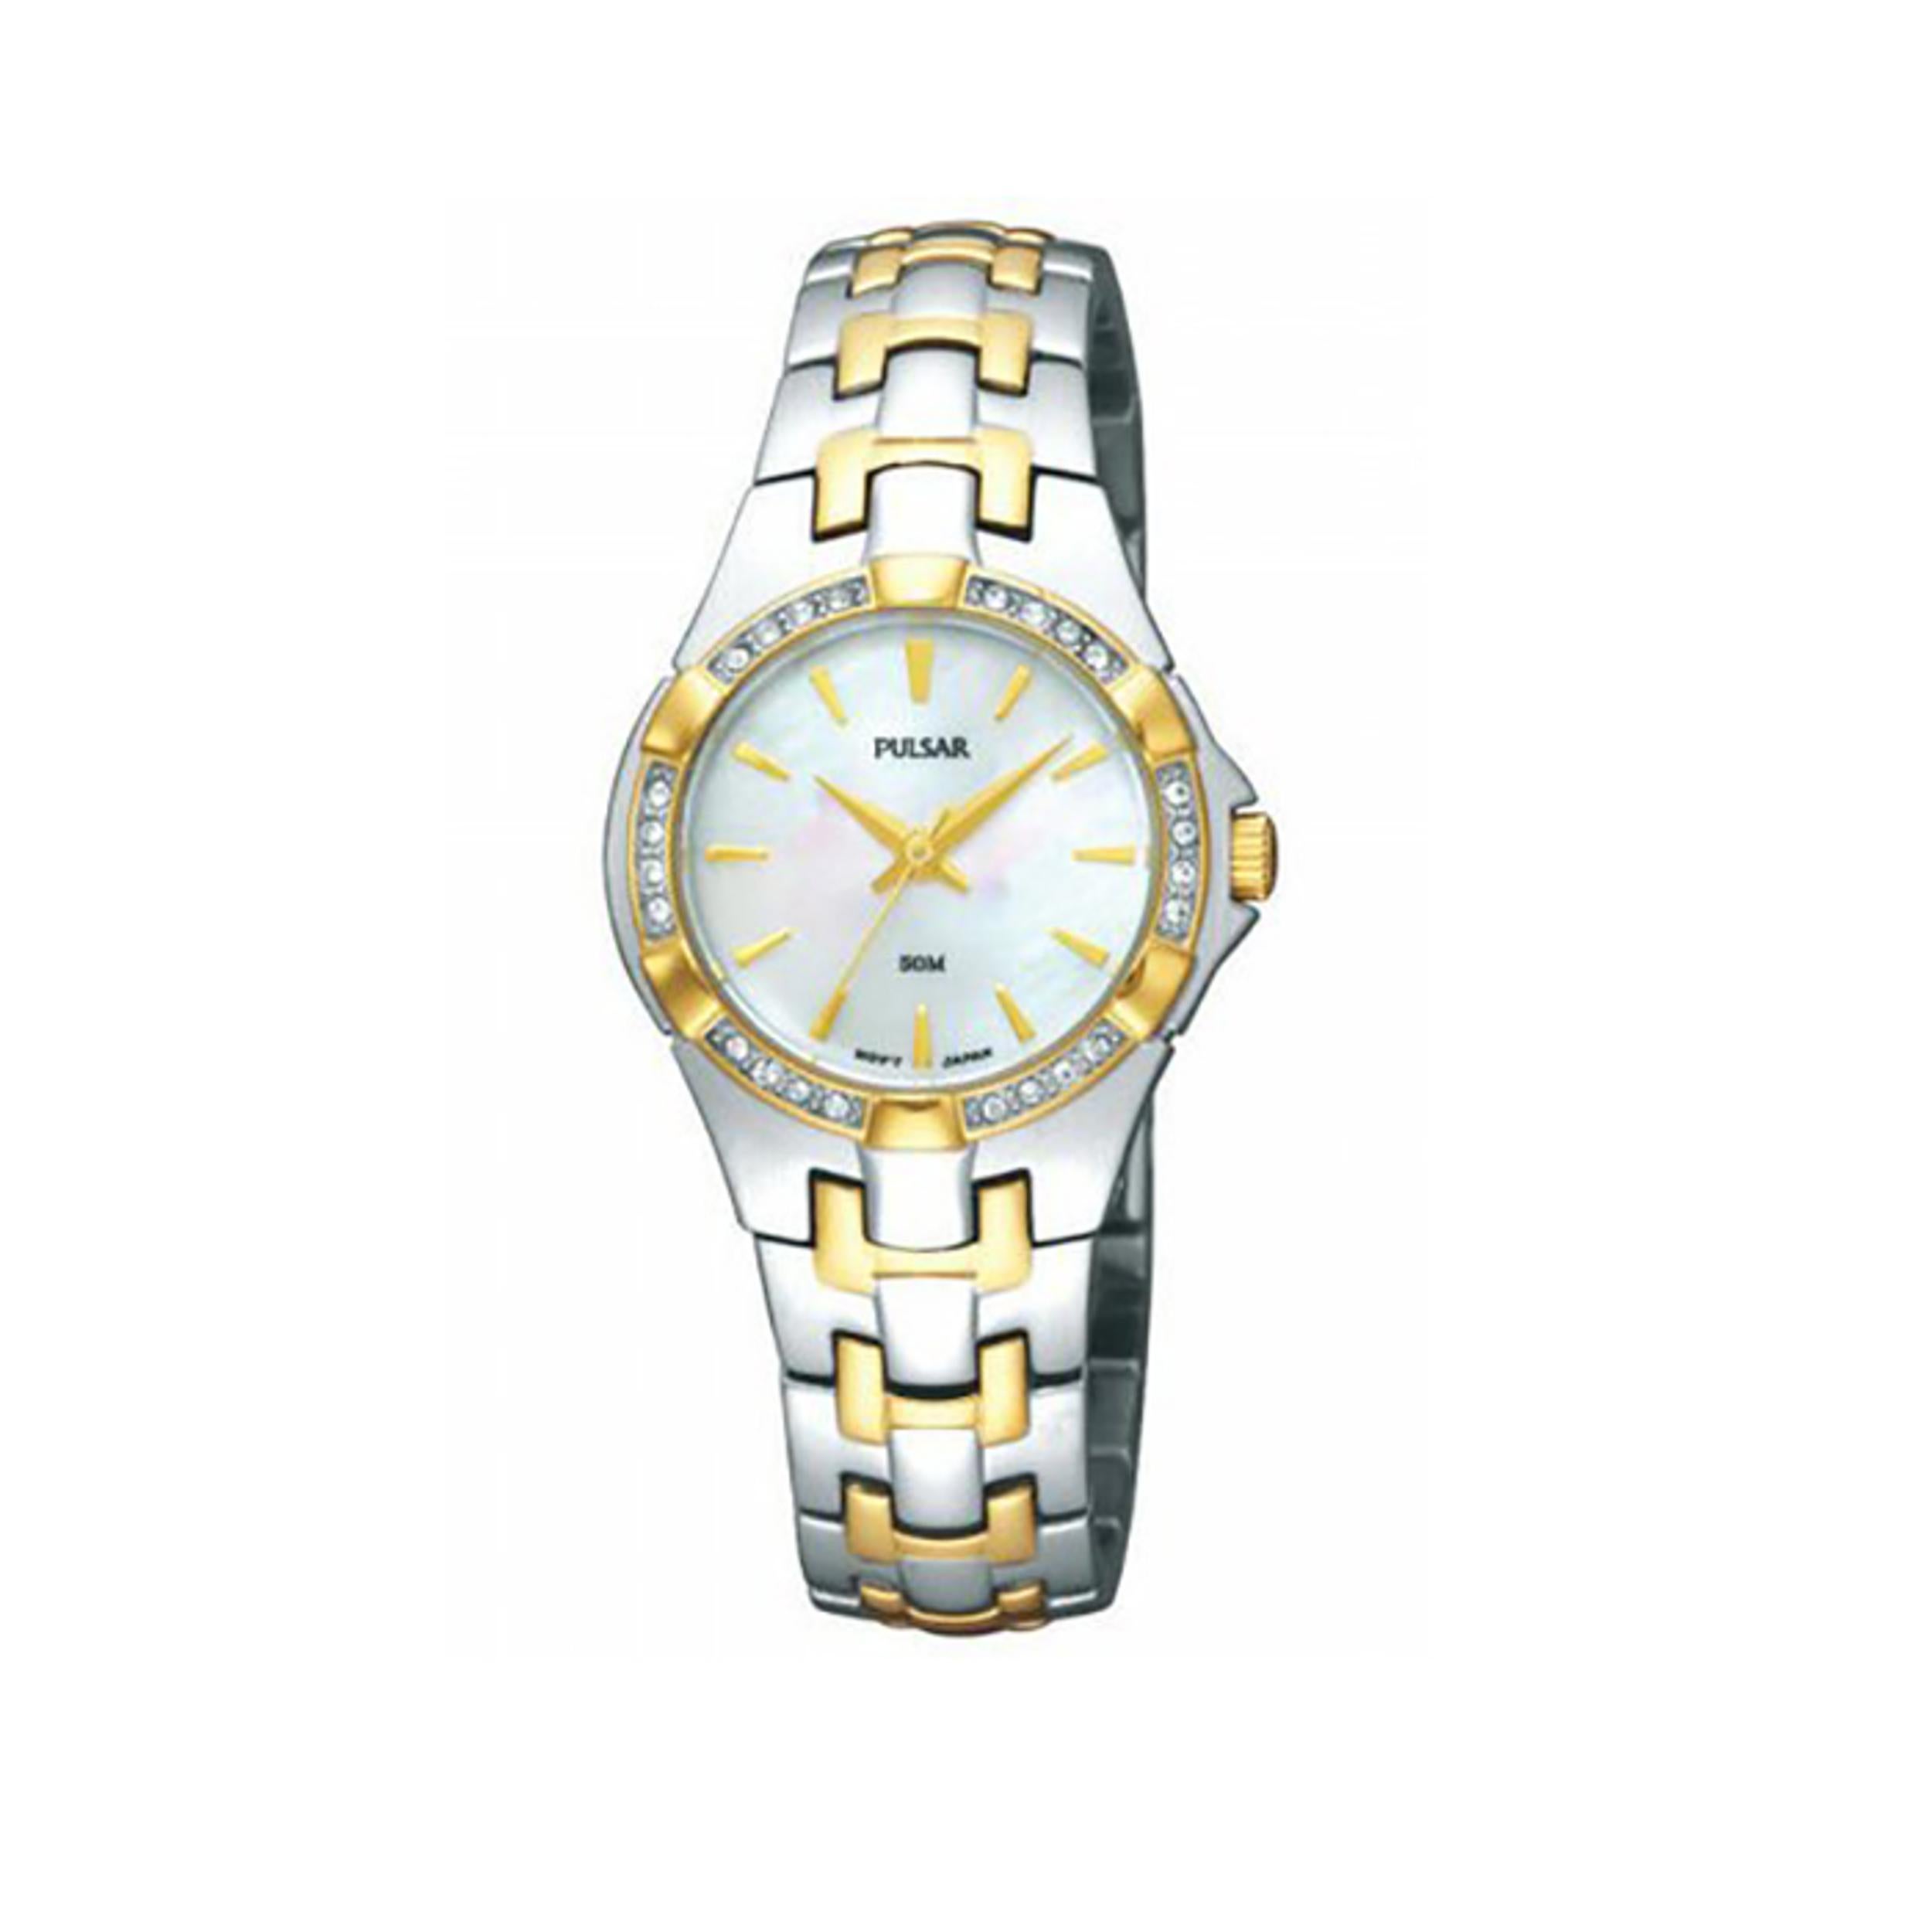 Pre-owned Pulsar Two-Tone Stainless Steel Crystal MOP Dial Quartz Ladies Watch PTC536. Micro Scratches from handling. This Beautiful Timepiece is Powered By a Quartz (Battery) Movement and Features: Stainless Steel Case with a Two-Tone Bracelet,